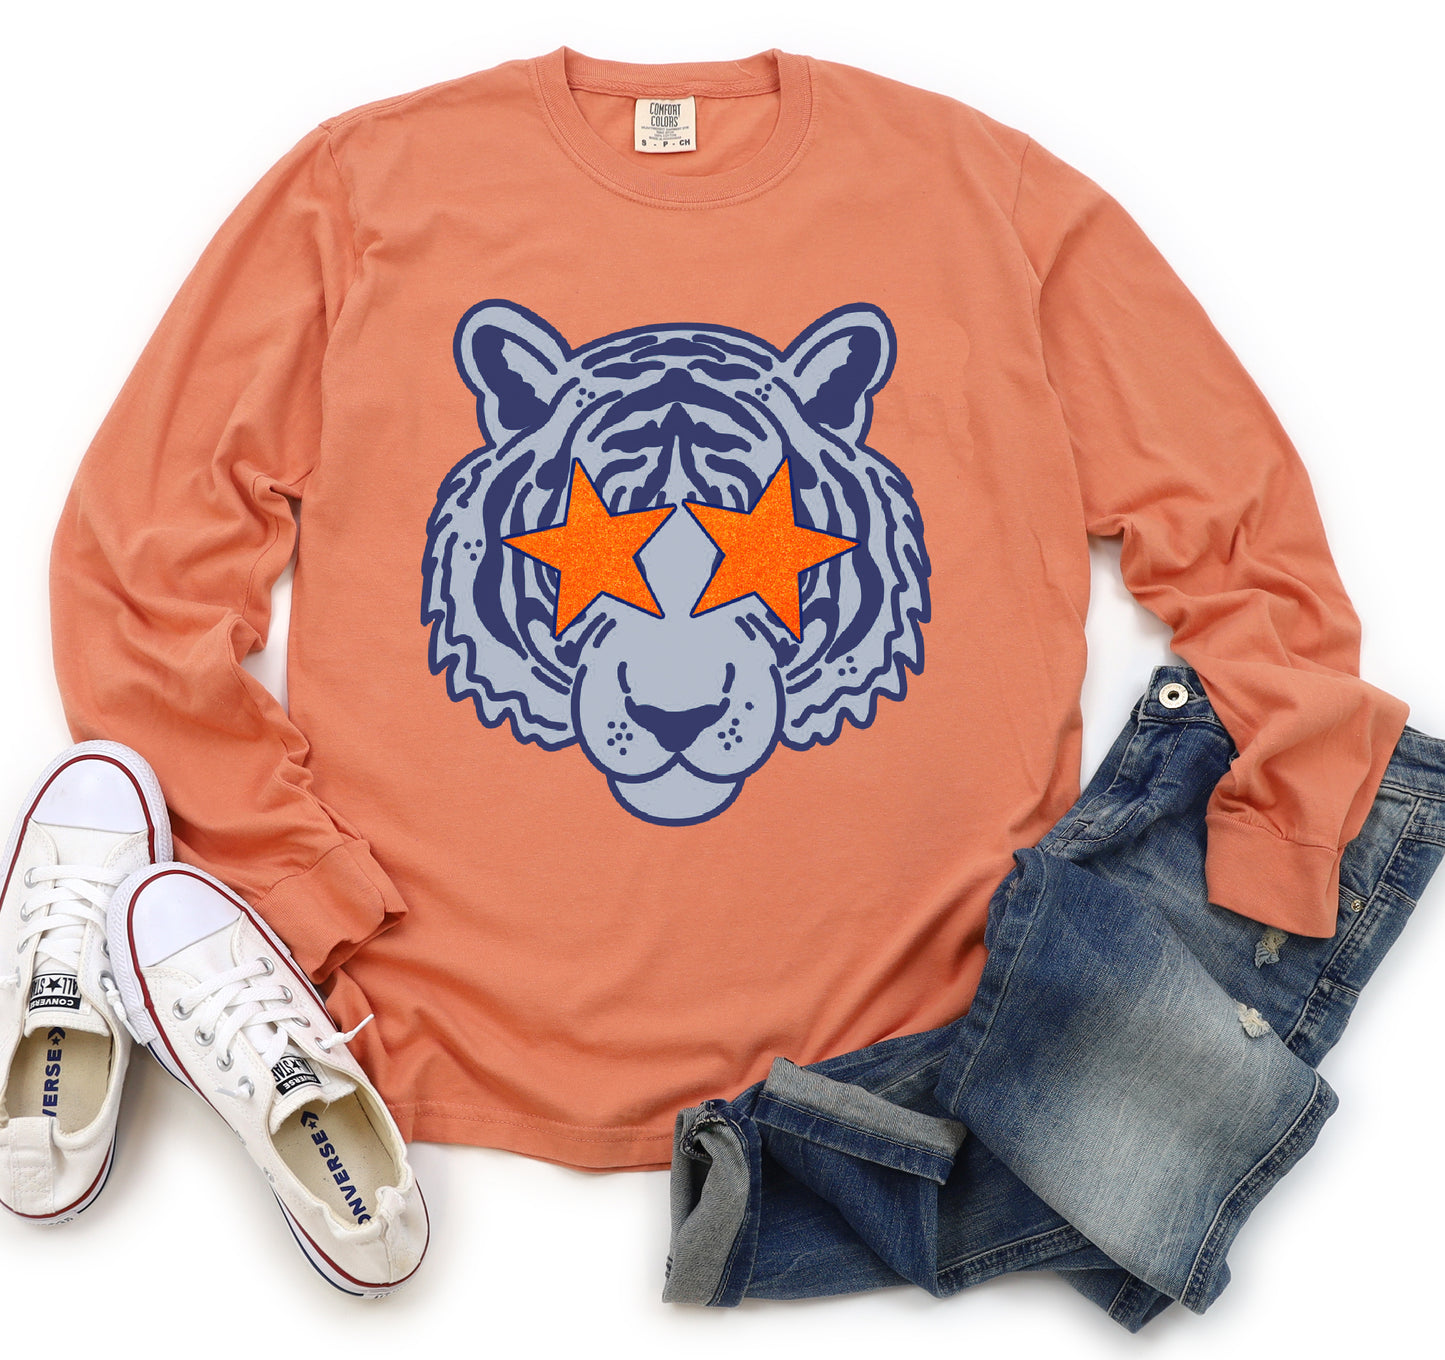 Long Sleeved Comfort Colors Terracotta - Navy and Orange Tiger Shirt / Adult Sizes